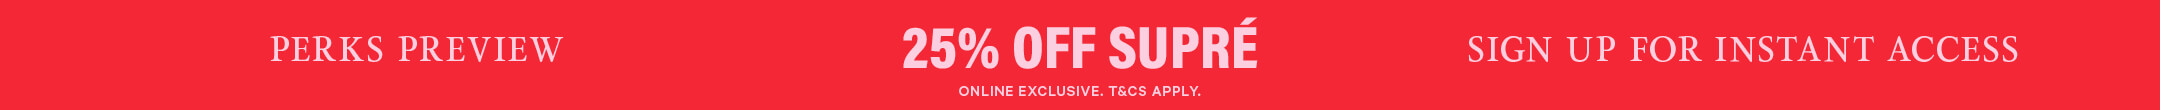 Perks Member Exclusive: Login to Shop 25% Off Everything at Supre